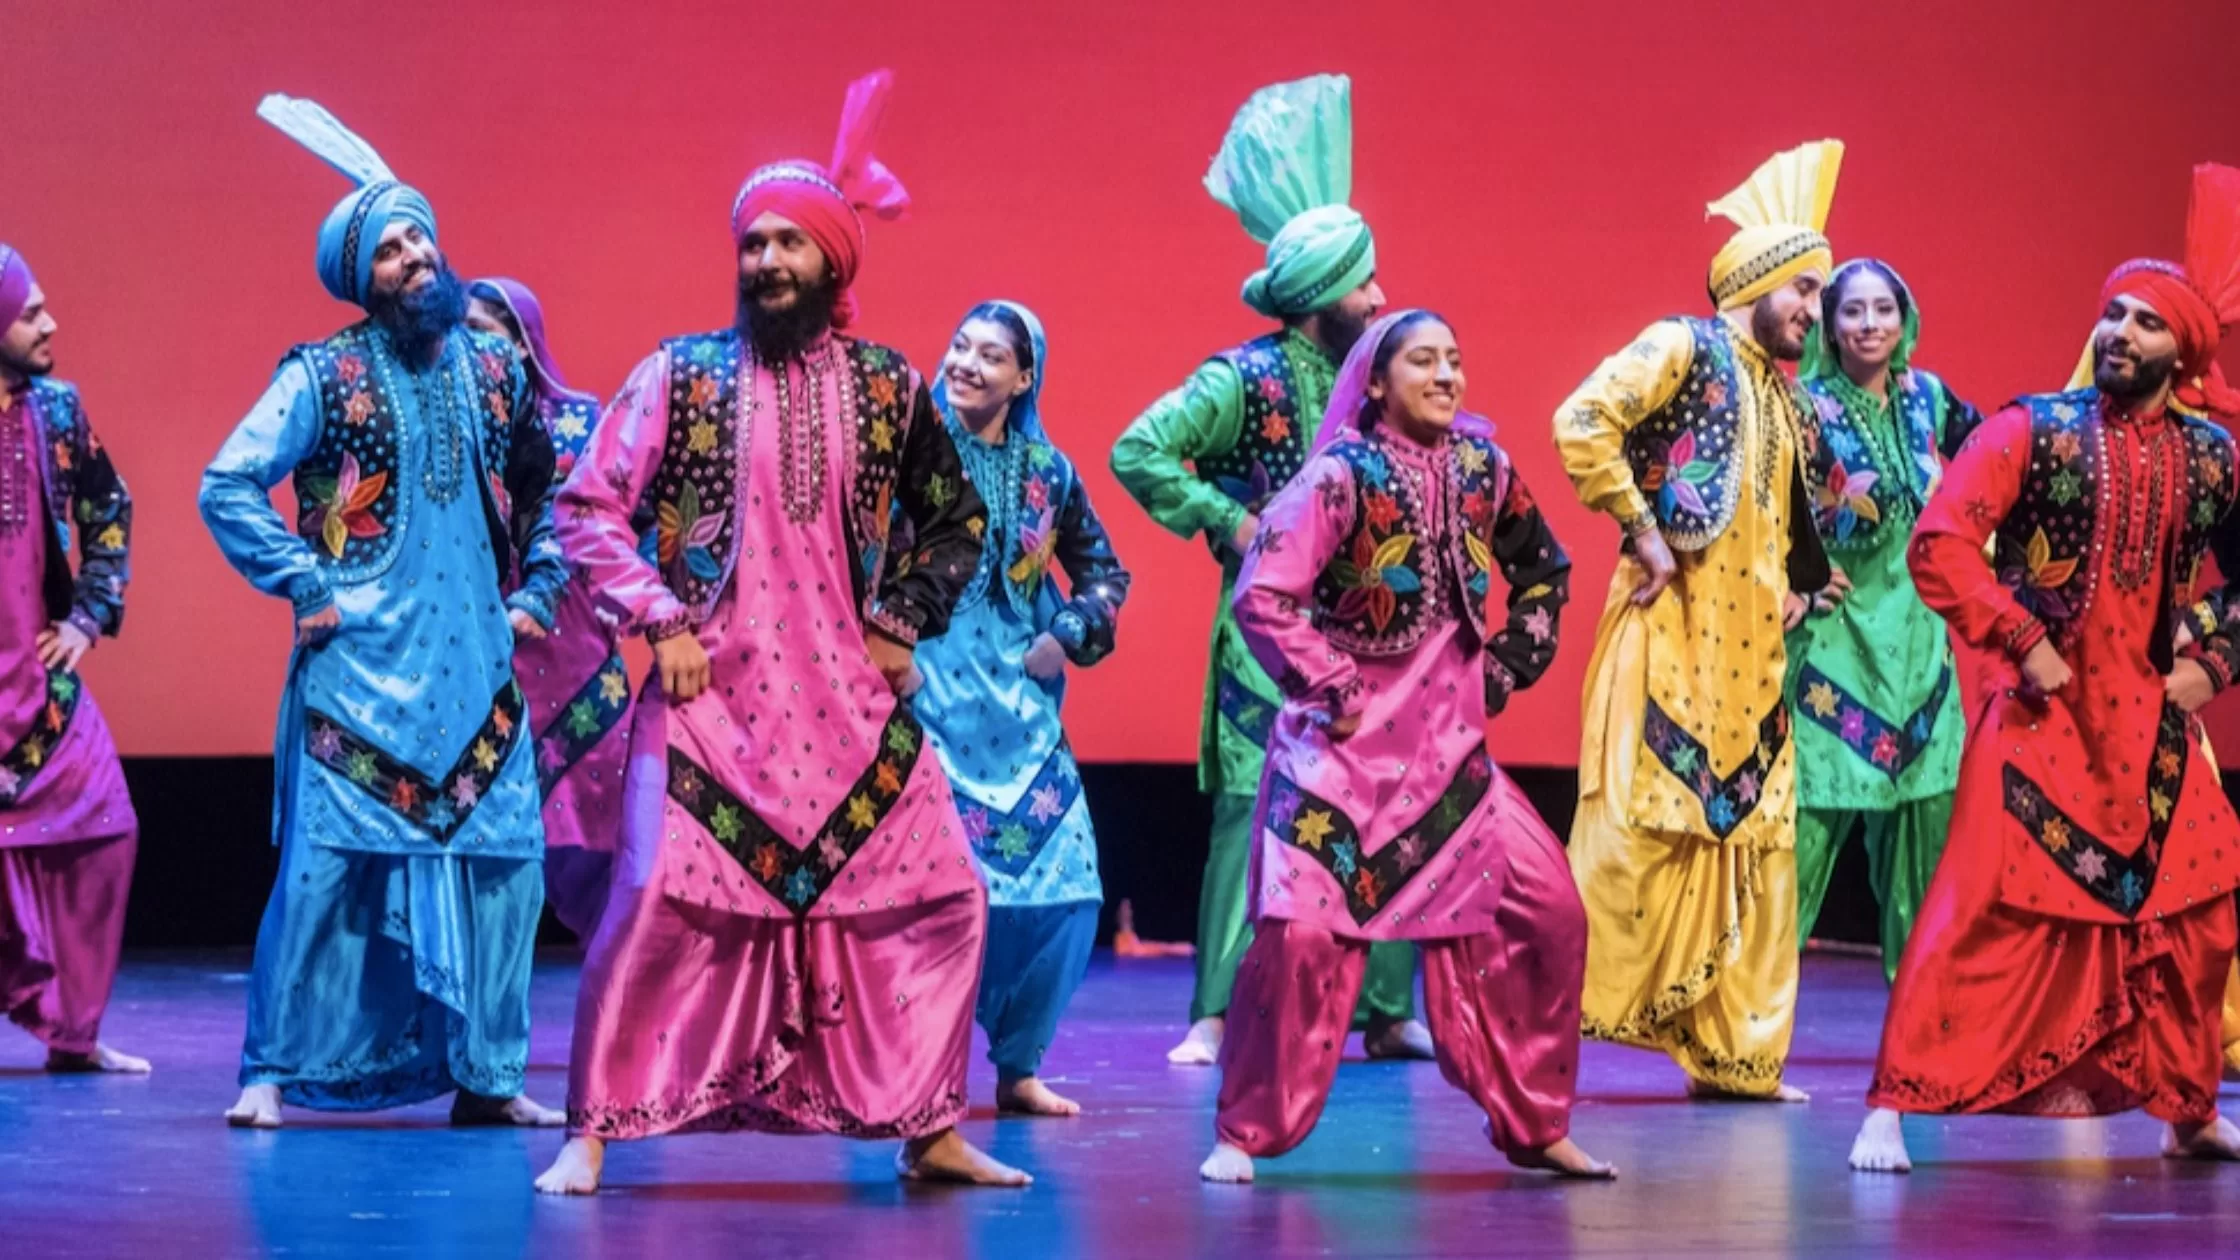 A group of dances doing bhangra on stage.